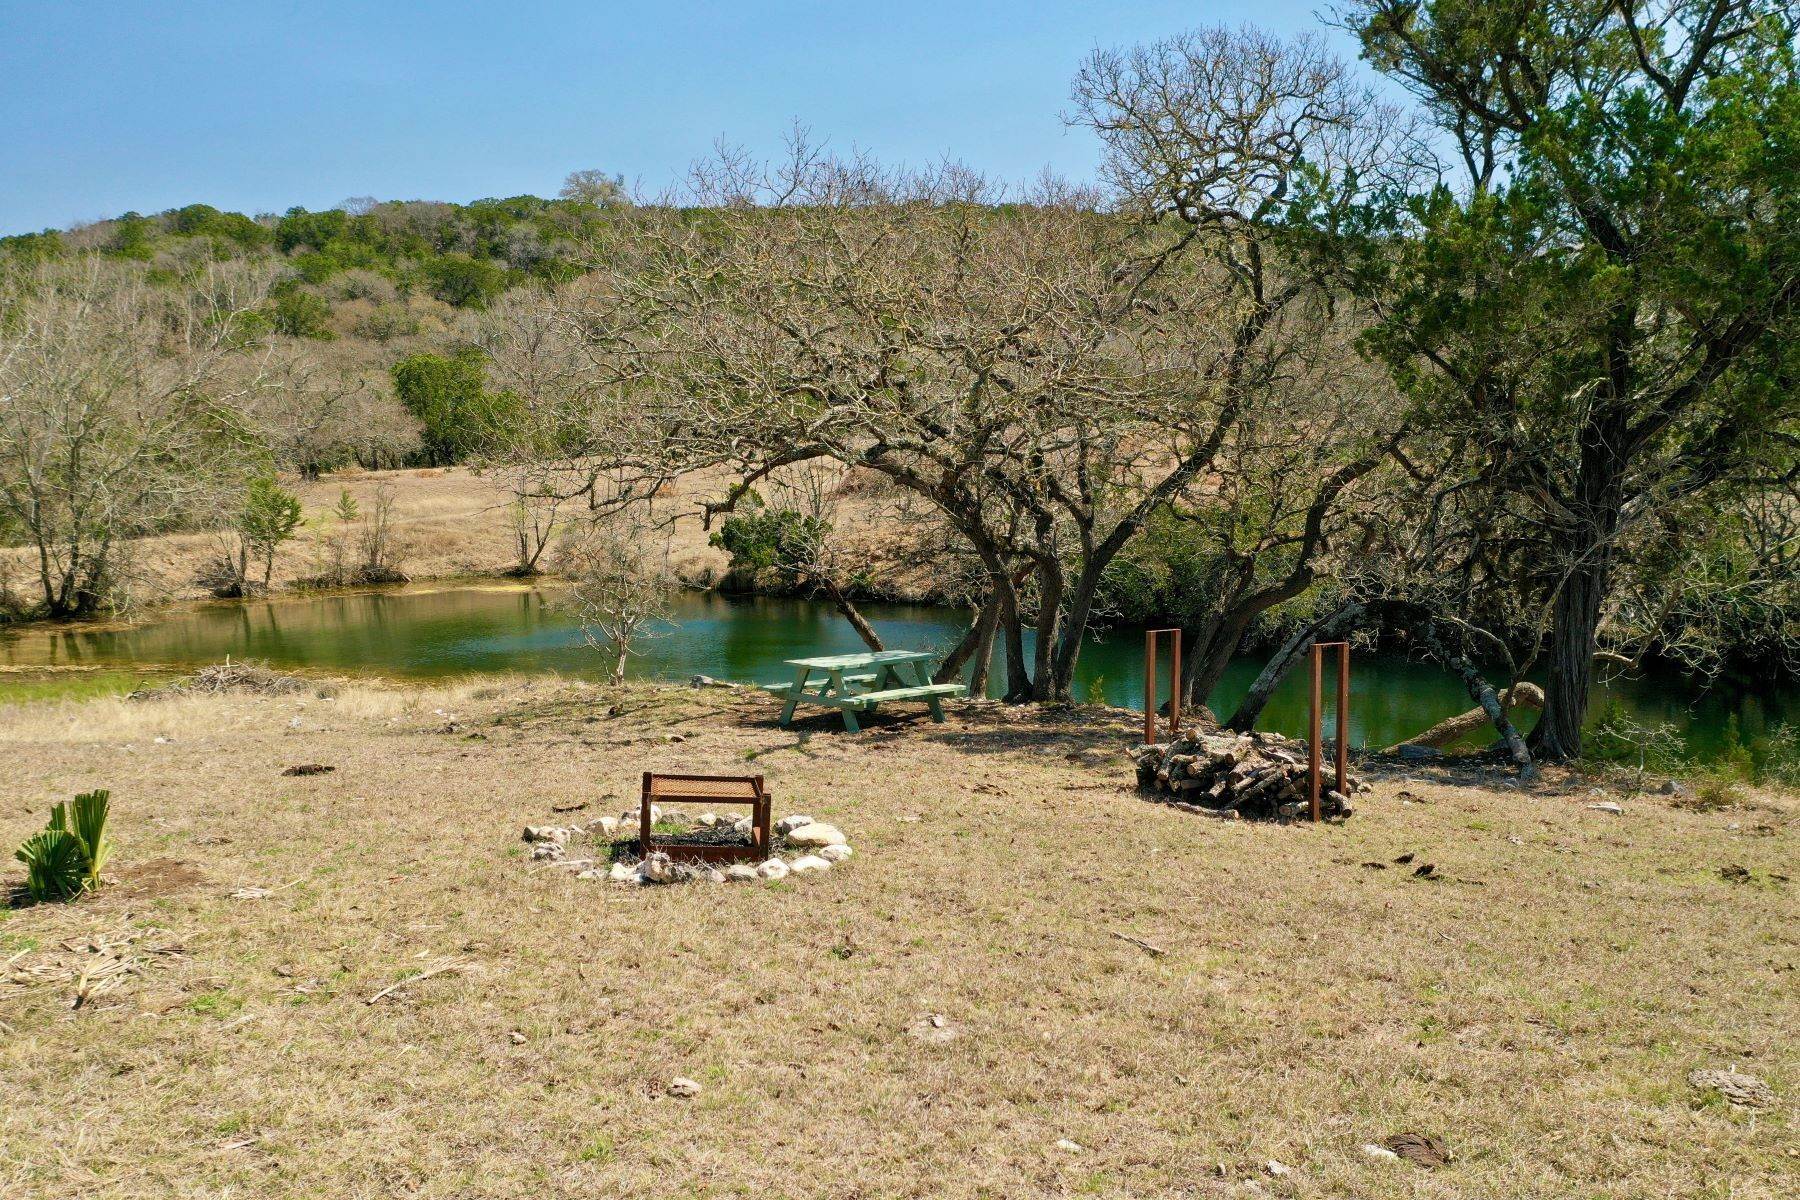 29. Farm and Ranch Properties at 2,269.85+/- Acres Less Ranch, Kendall County, 650 Wild Turkey Blvd. Boerne, Texas 78006 United States